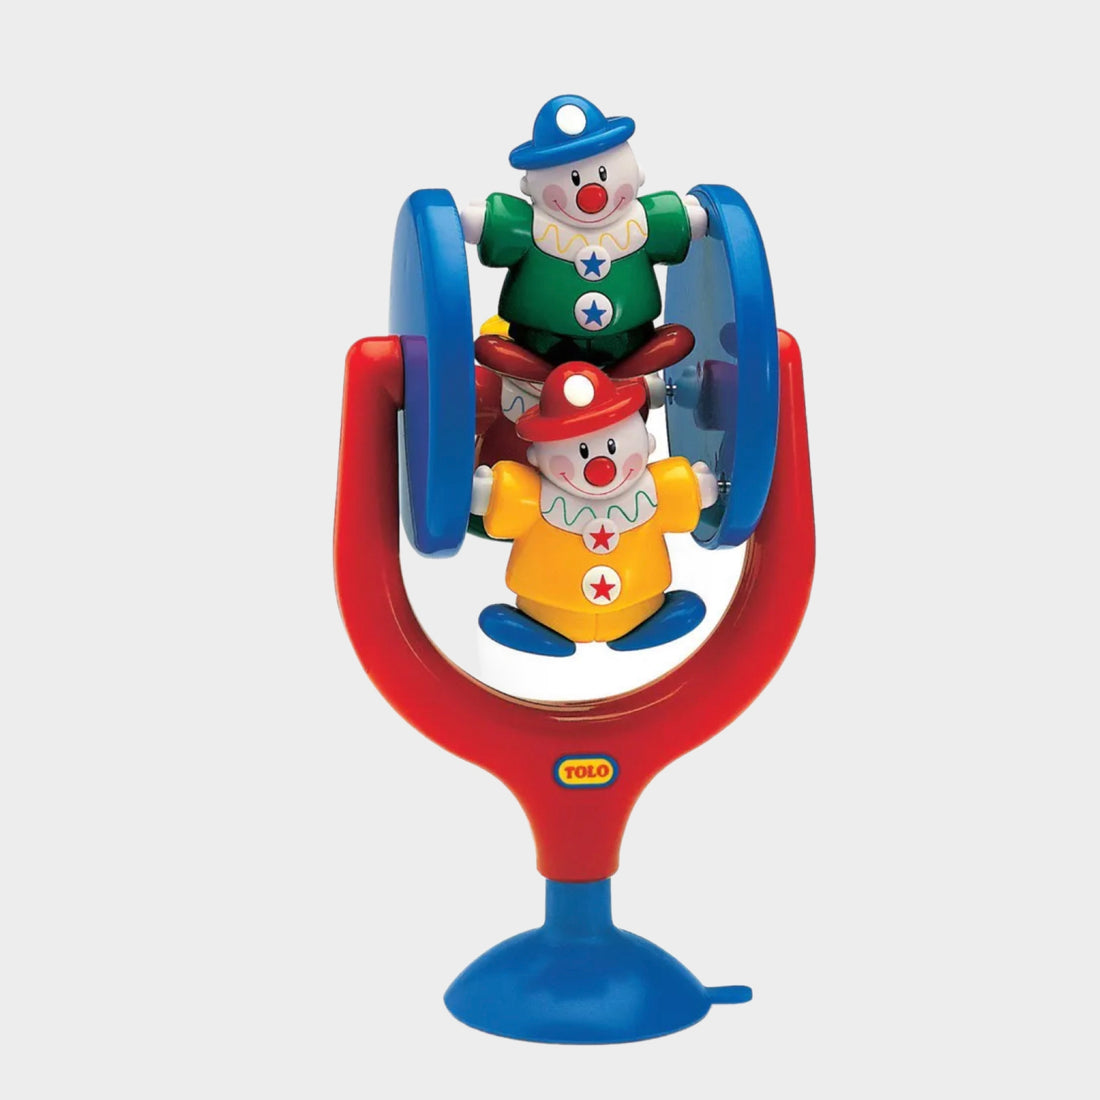 Tolo Classic Table Toy with Suction Cup - Spinning Clowns